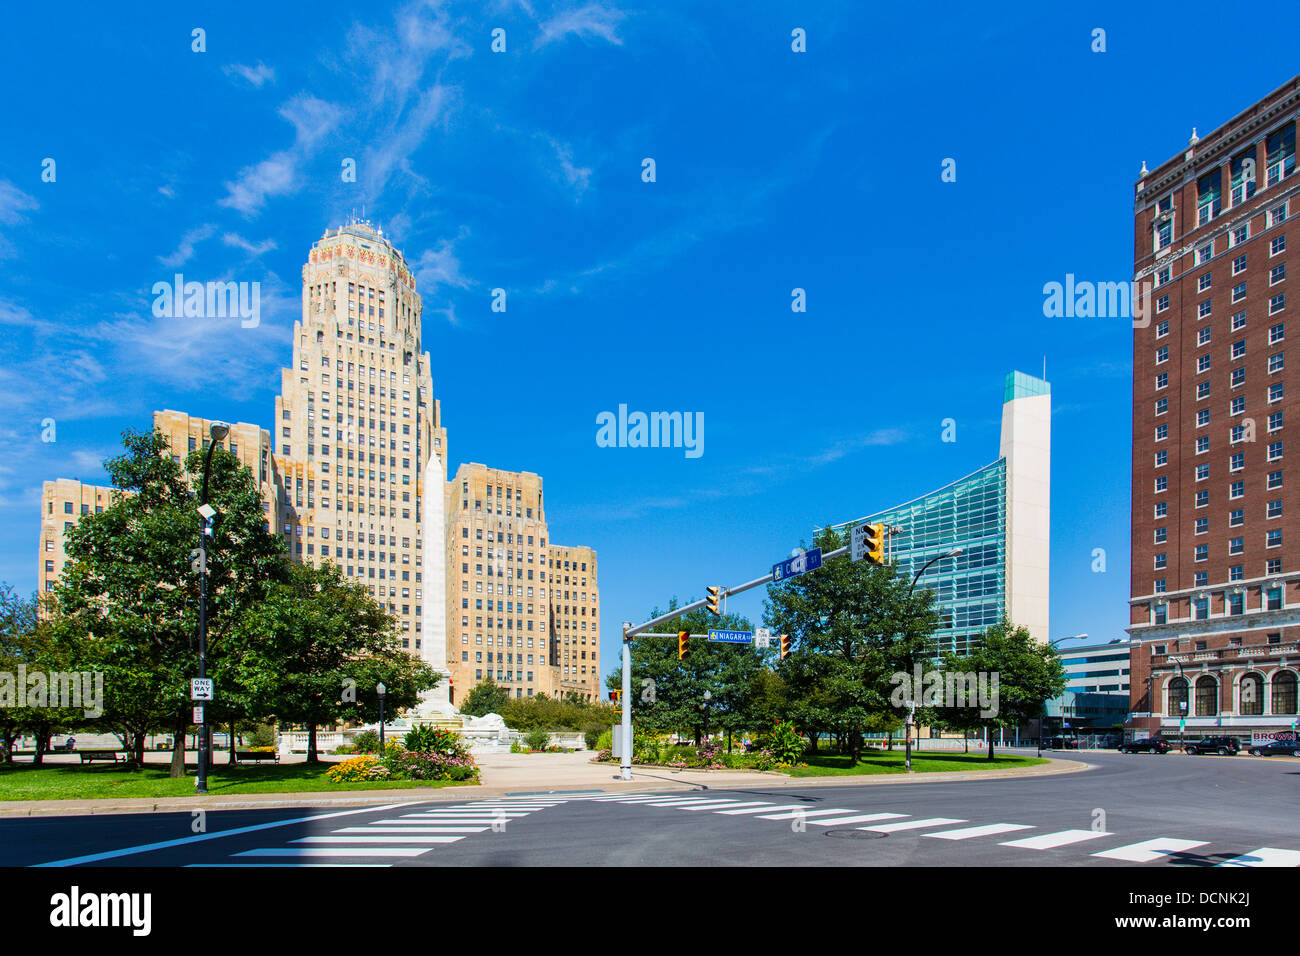 Niagara Square and City Hall in the city of Buffalo New York United States Stock Photo